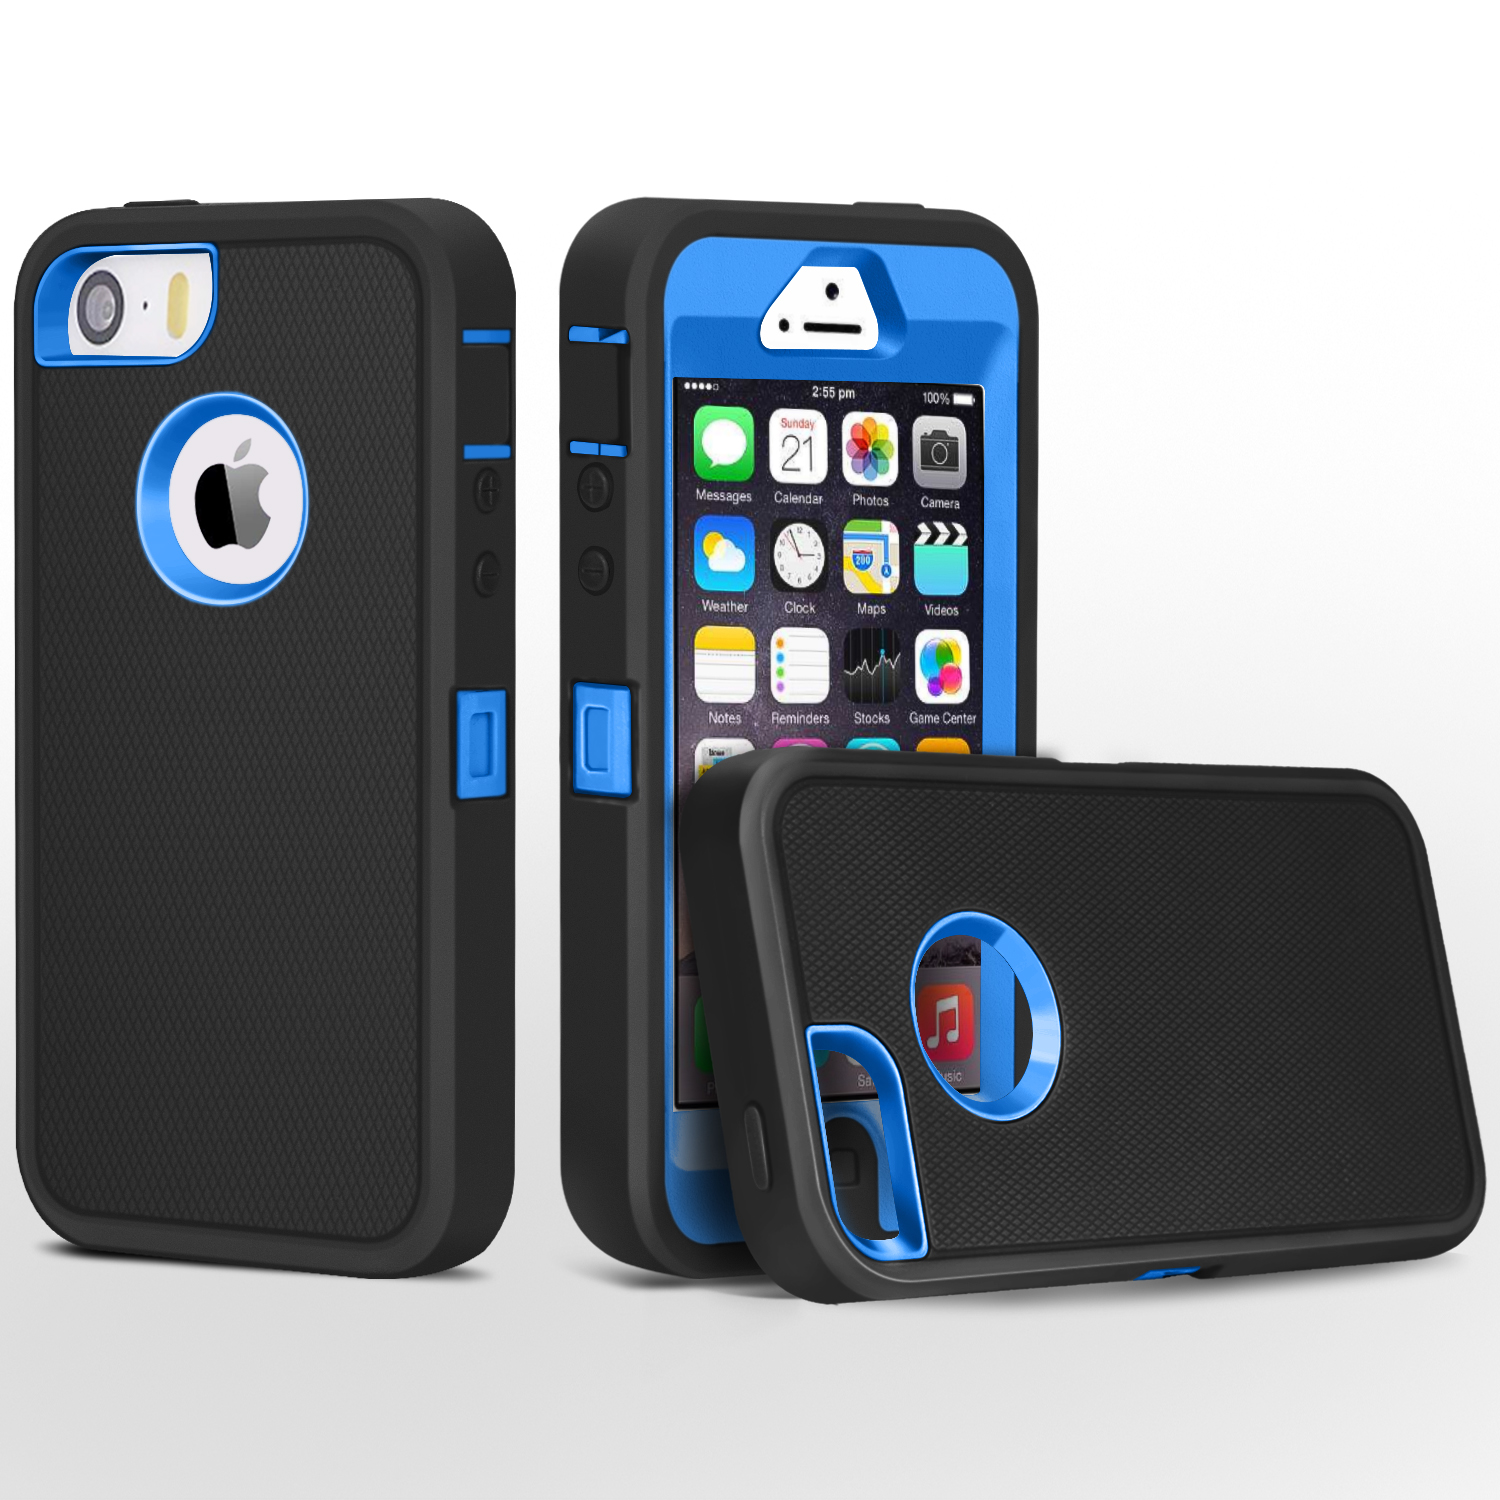 iPhone 5 Case, Fogeek Heavy Duty PC + TPU Combo Protective Defender Body Armor Case for iPhone 5 & iPhone 5S(Black/Dark Blue) …